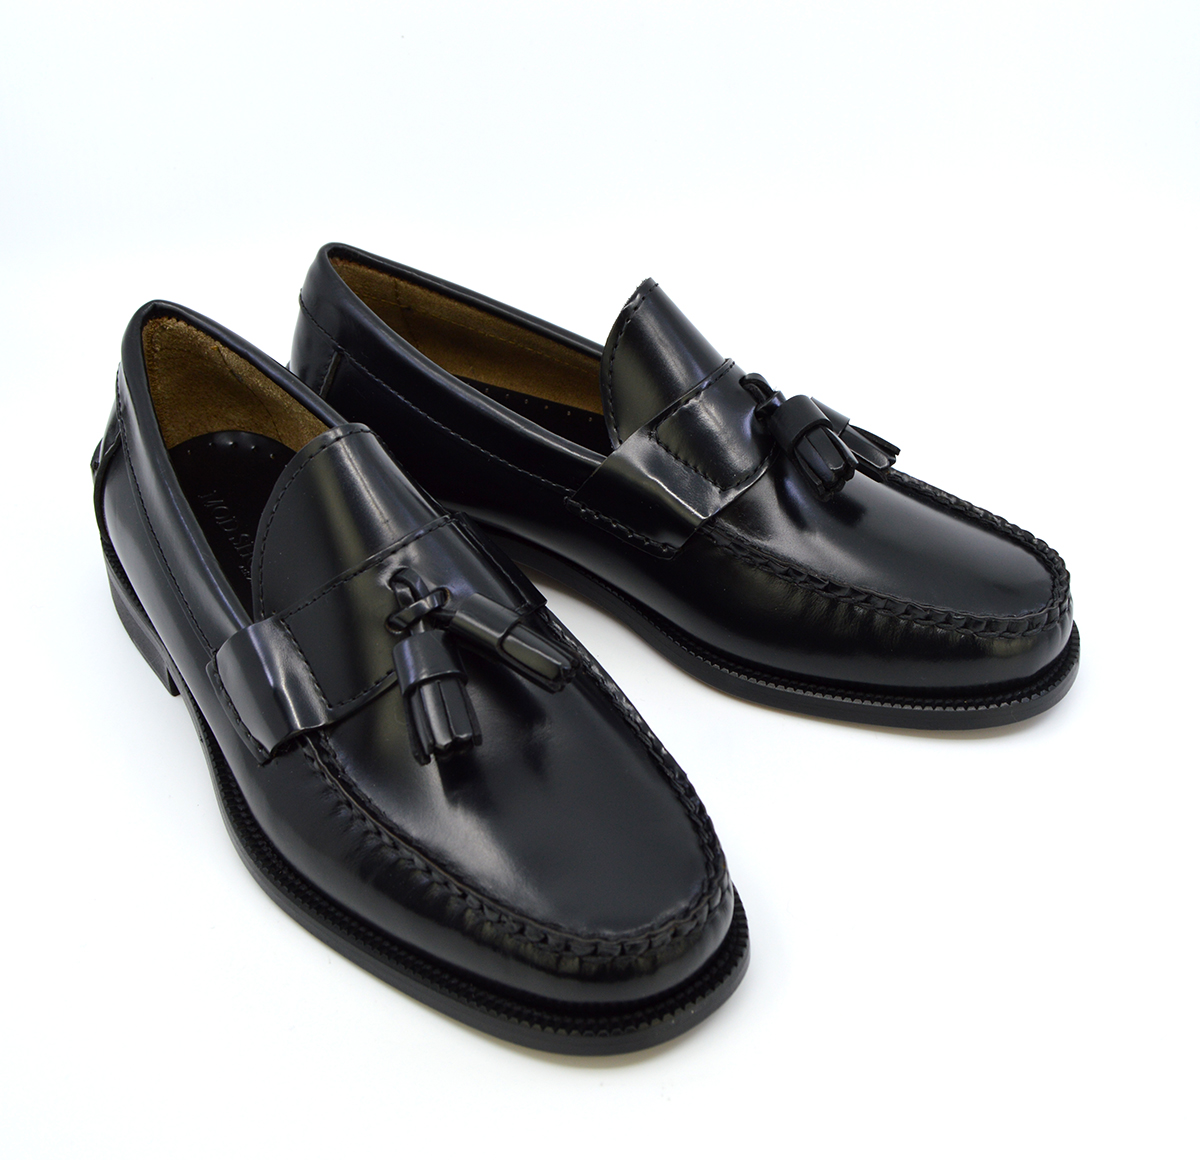 Tassel Loafers in Black – The Baron – Mod Shoes